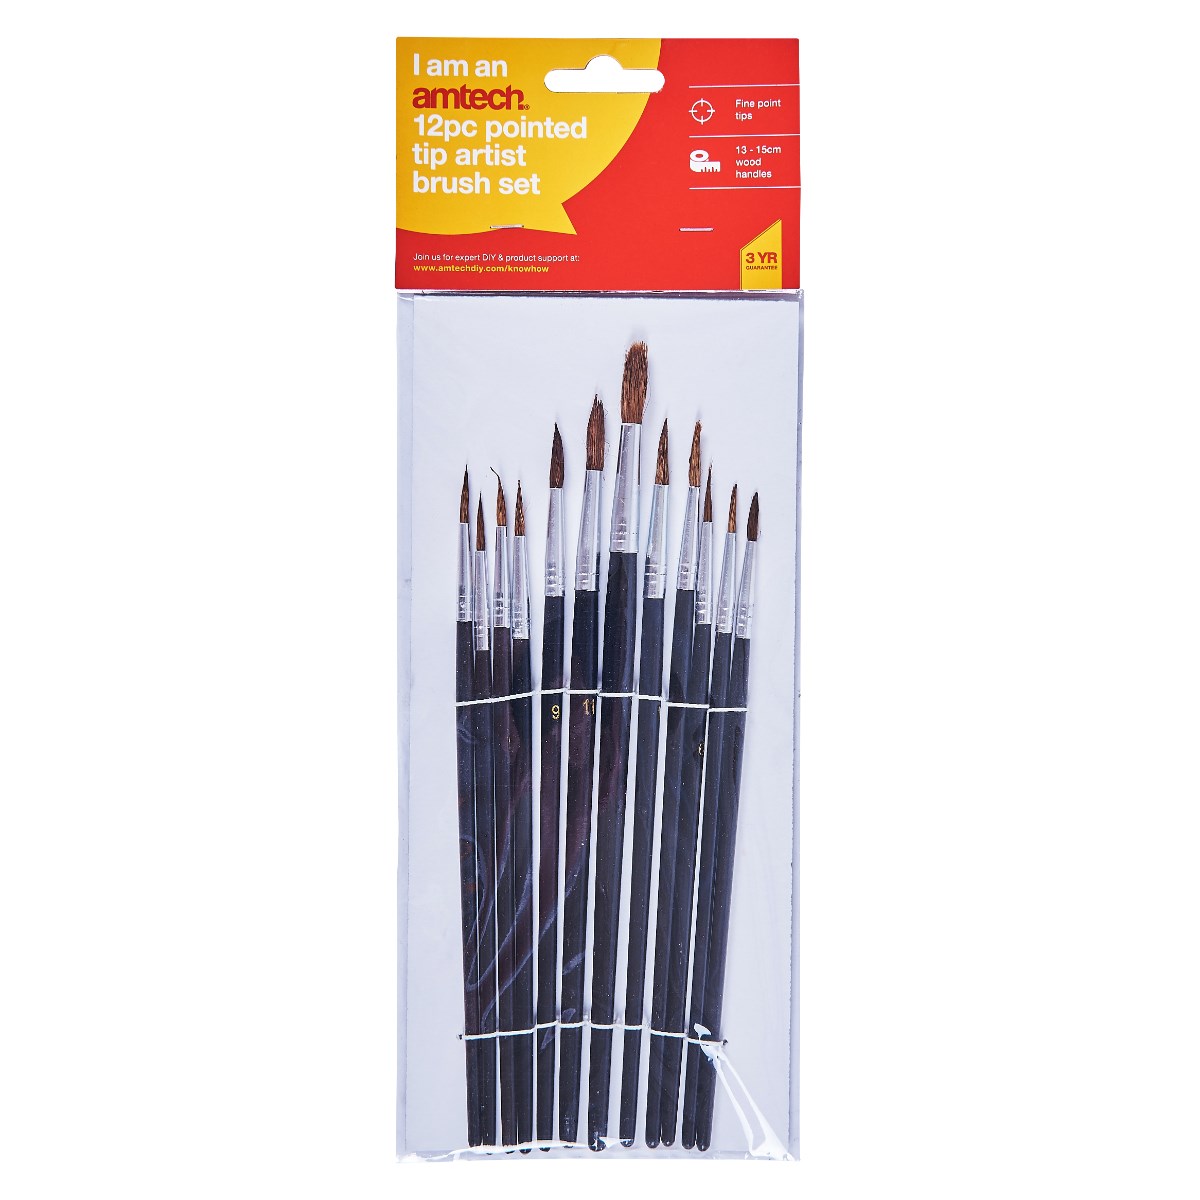 12 PIECE POINTED TIP ARTIST PAINT BRUSH SET PROFESSIONAL QUALITY ART AND CRAFT 